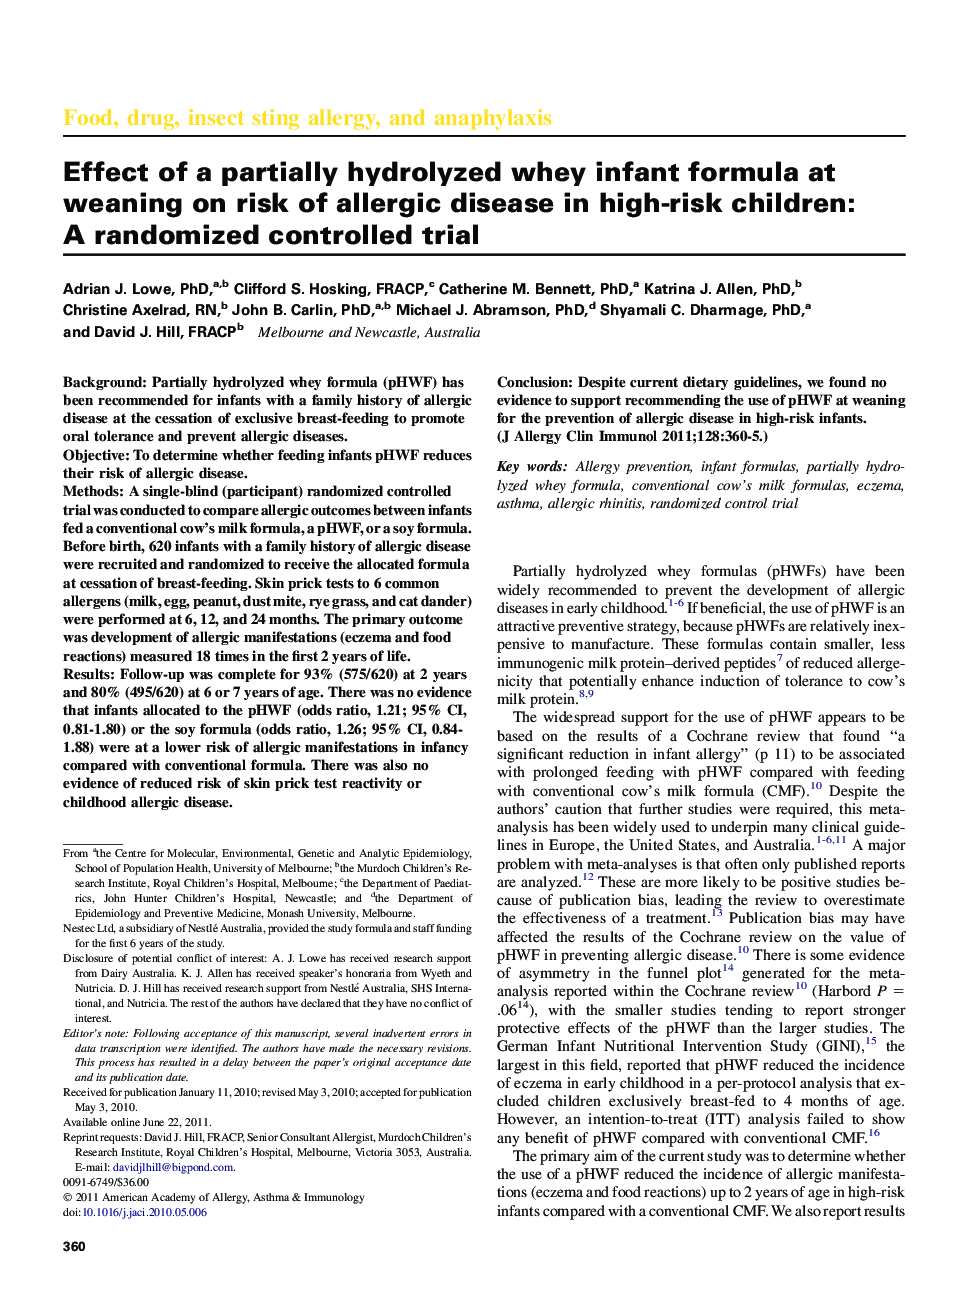 Effect of a partially hydrolyzed whey infant formula at weaning on risk of allergic disease in high-risk children: AÂ randomized controlled trial